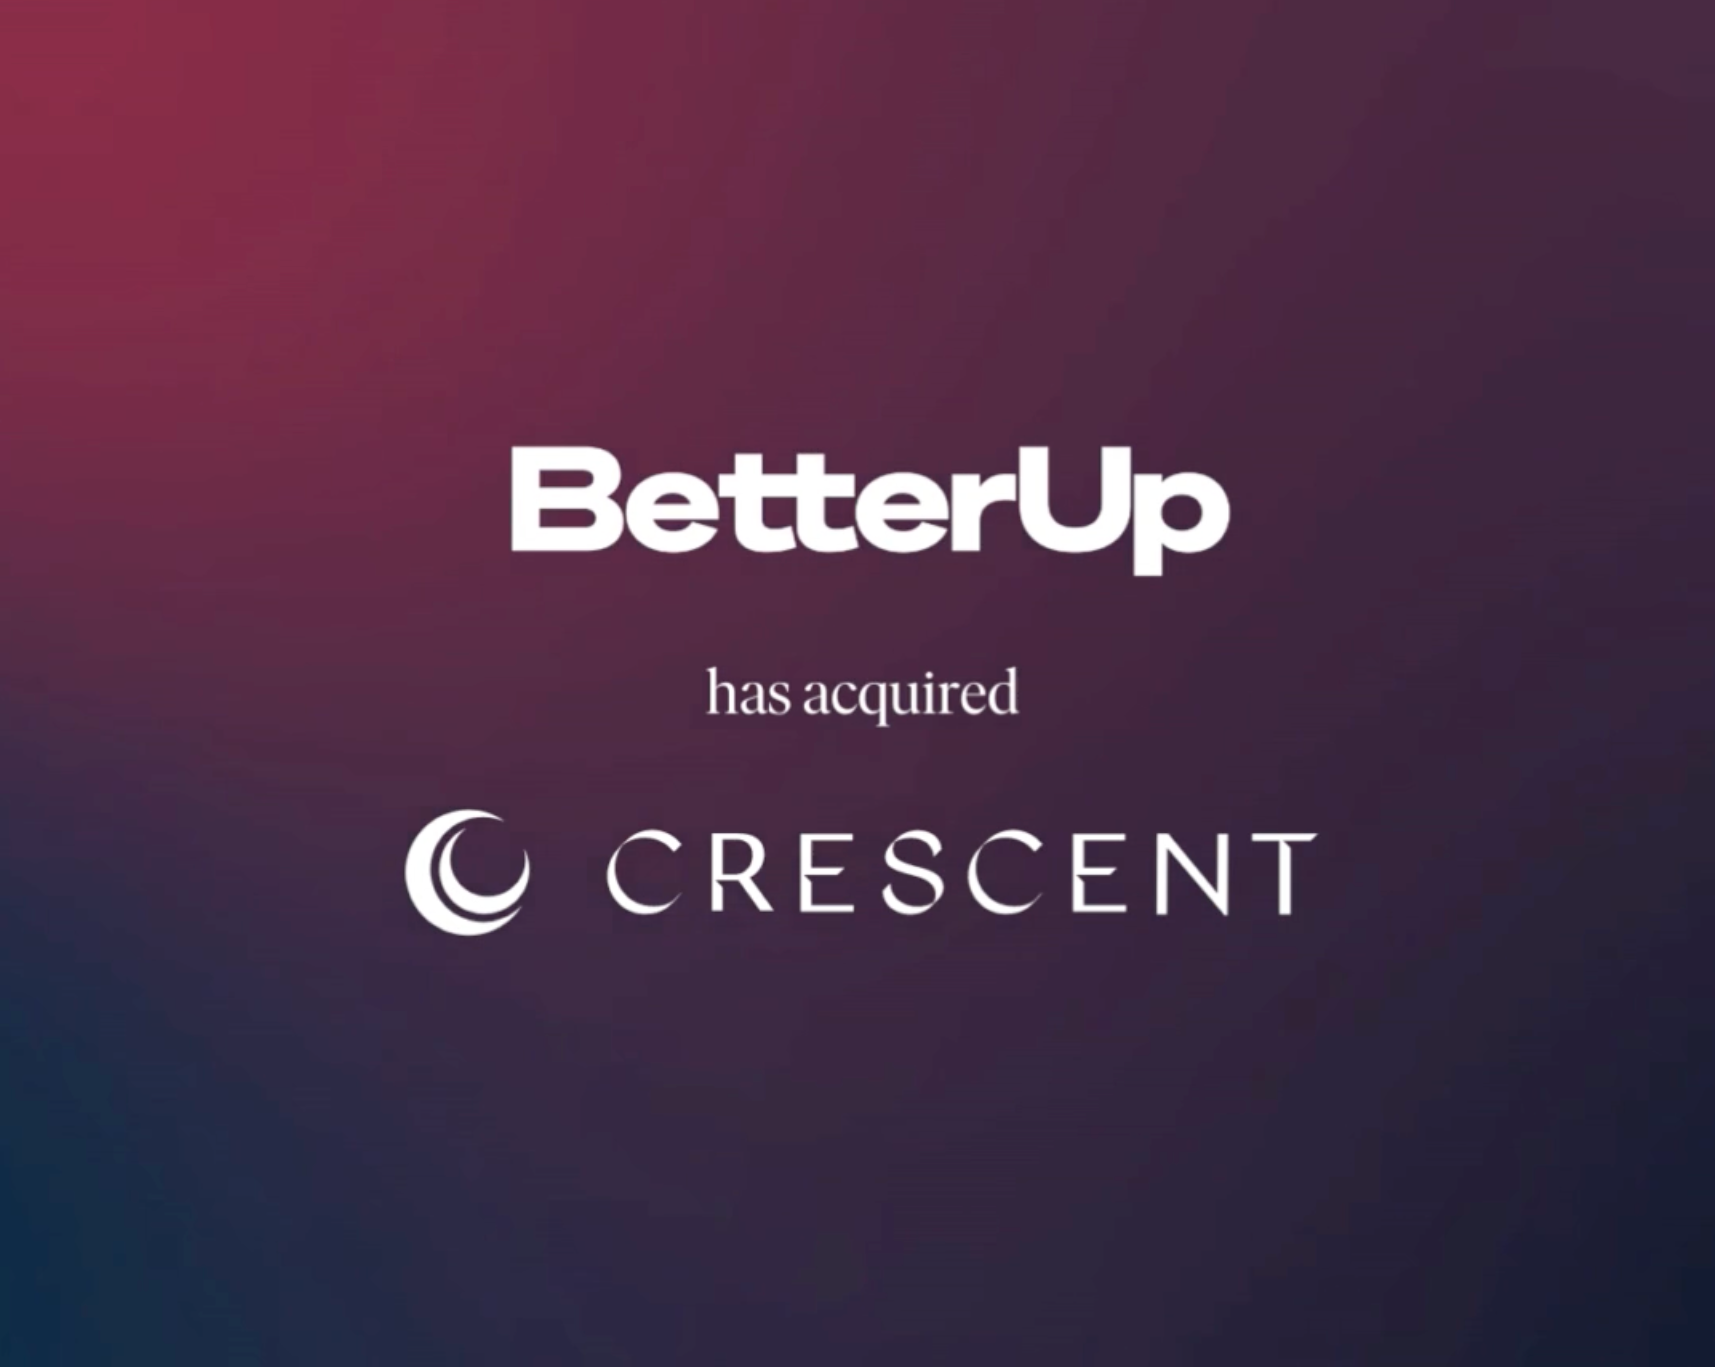 Crescent joins forces with BetterUp